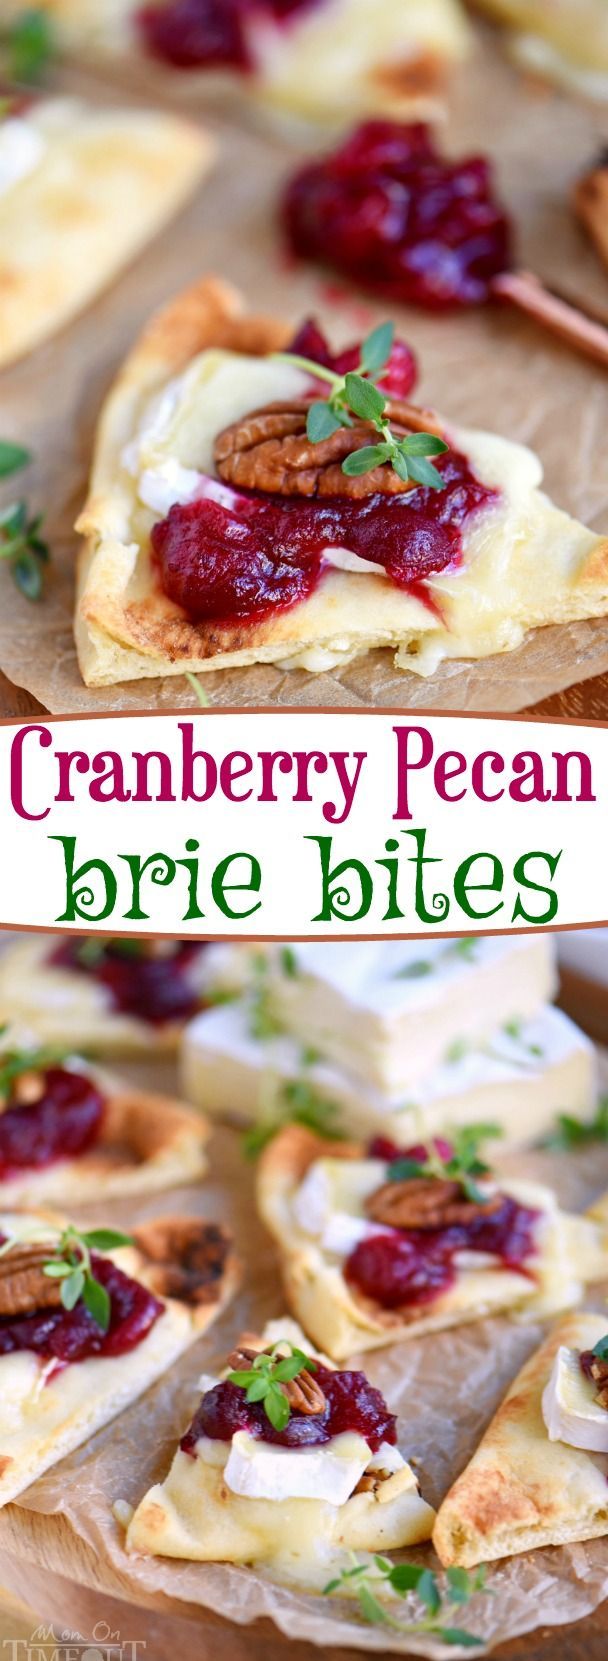 These Cranberry Pecan Brie Bites are perfect for holiday entertaining! Whether you make them for Thanksgiving, Christmas, or New